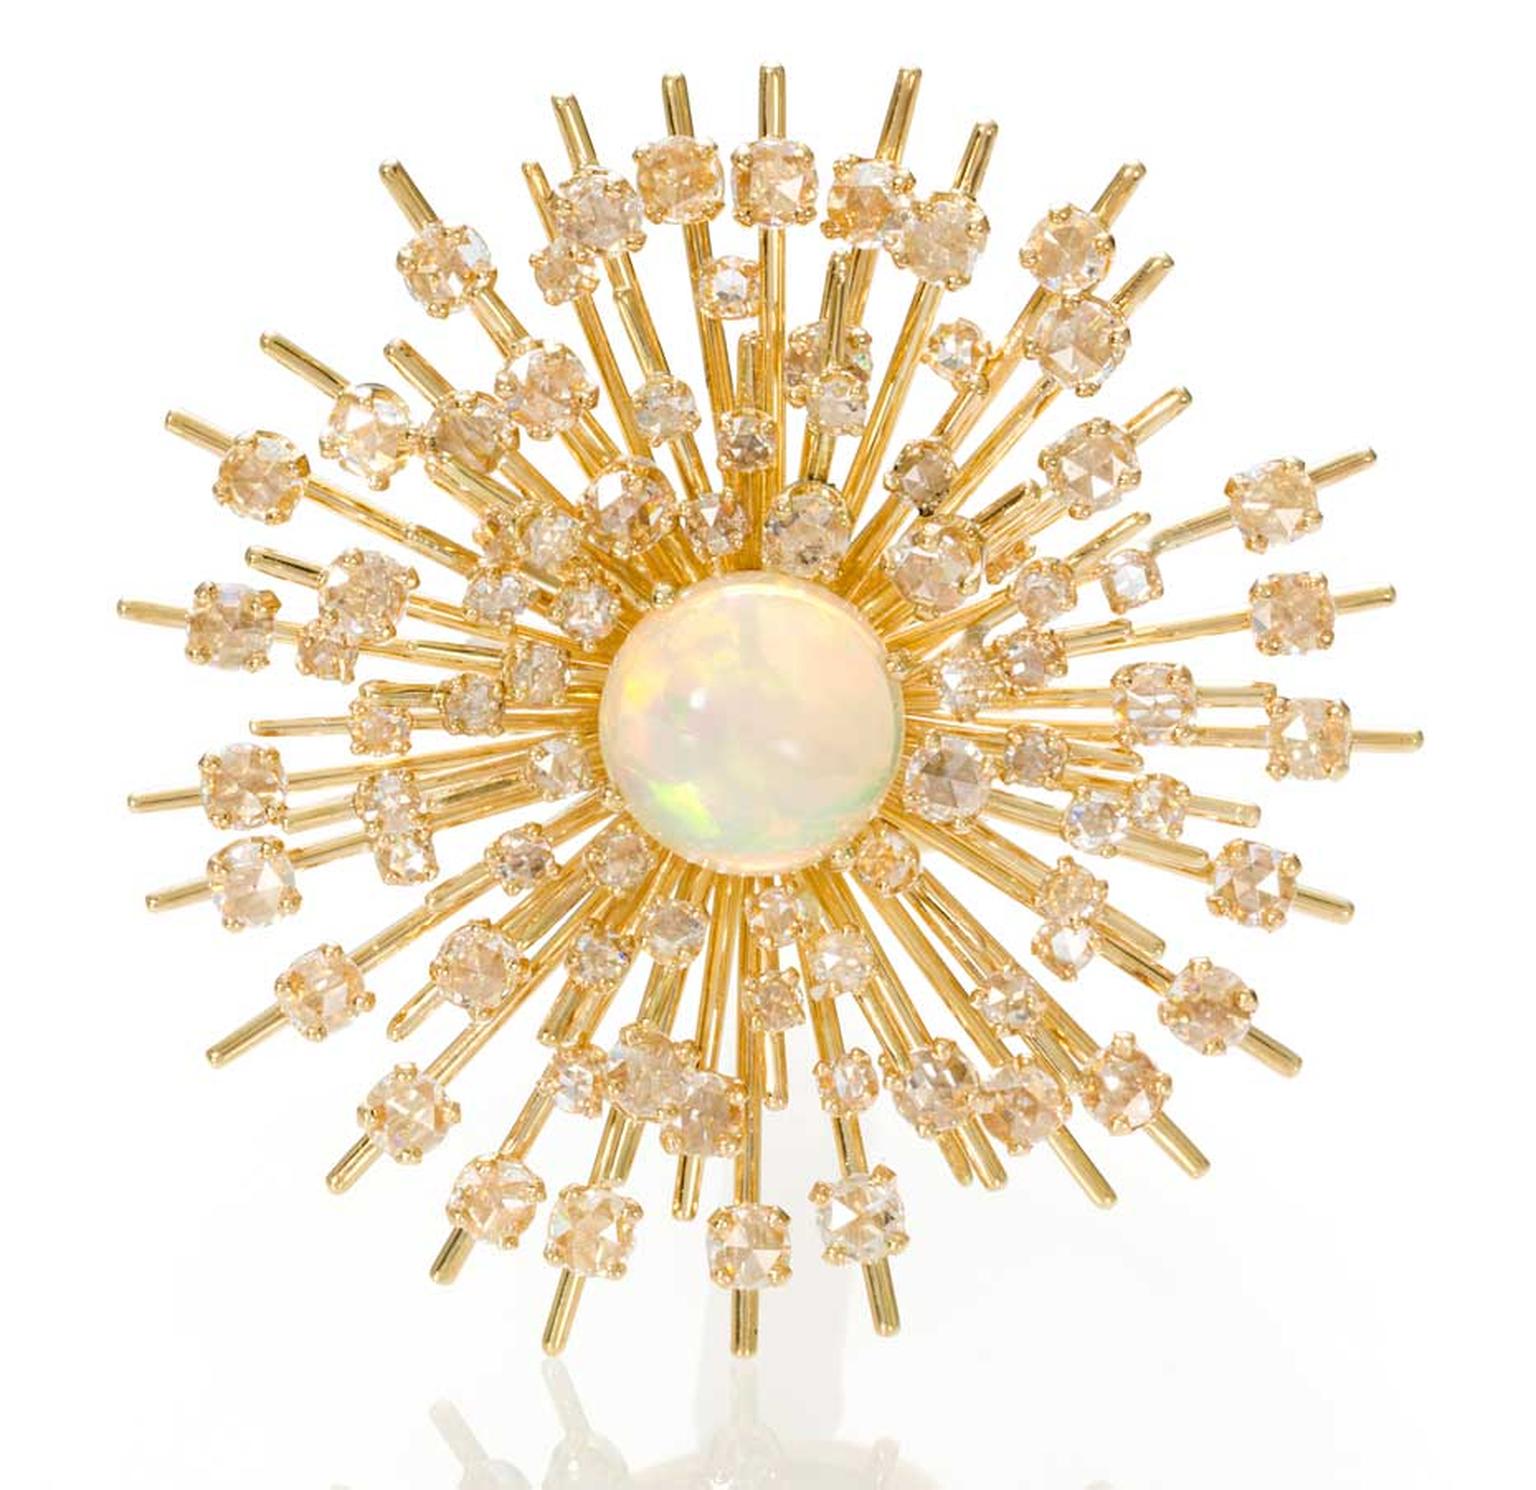 This stunning Starburst opal and diamond ring by Maiyet is set with a circular cabochon opal within a rose-cut diamond and gold starburst mount.